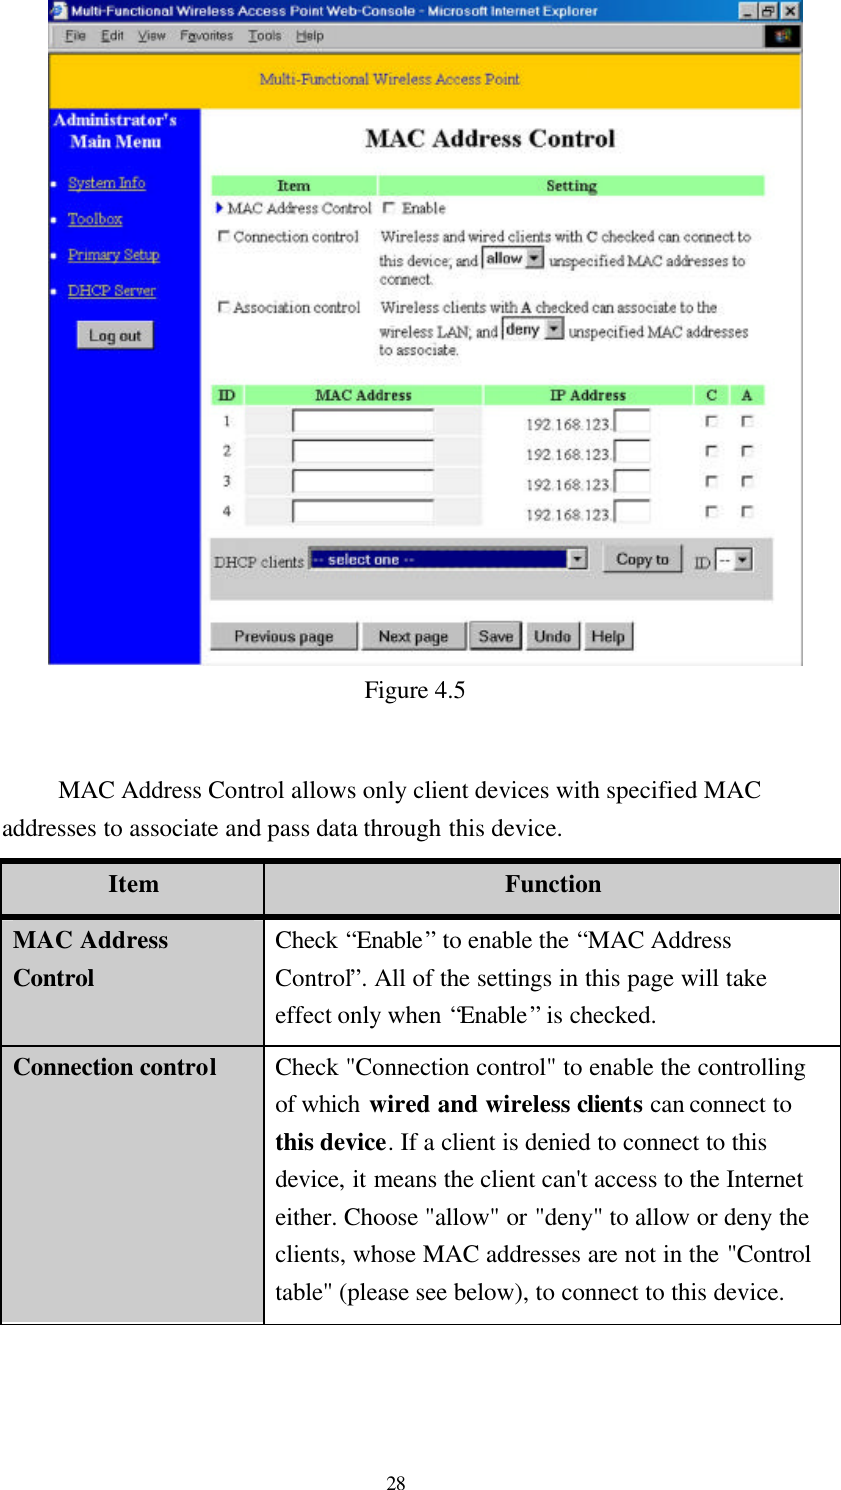  28  Figure 4.5  MAC Address Control allows only client devices with specified MAC addresses to associate and pass data through this device. Item Function MAC Address Control Check “Enable” to enable the “MAC Address Control”. All of the settings in this page will take effect only when “Enable” is checked. Connection control Check &quot;Connection control&quot; to enable the controlling of which wired and wireless clients can connect to this device. If a client is denied to connect to this device, it means the client can&apos;t access to the Internet either. Choose &quot;allow&quot; or &quot;deny&quot; to allow or deny the clients, whose MAC addresses are not in the &quot;Control table&quot; (please see below), to connect to this device. 